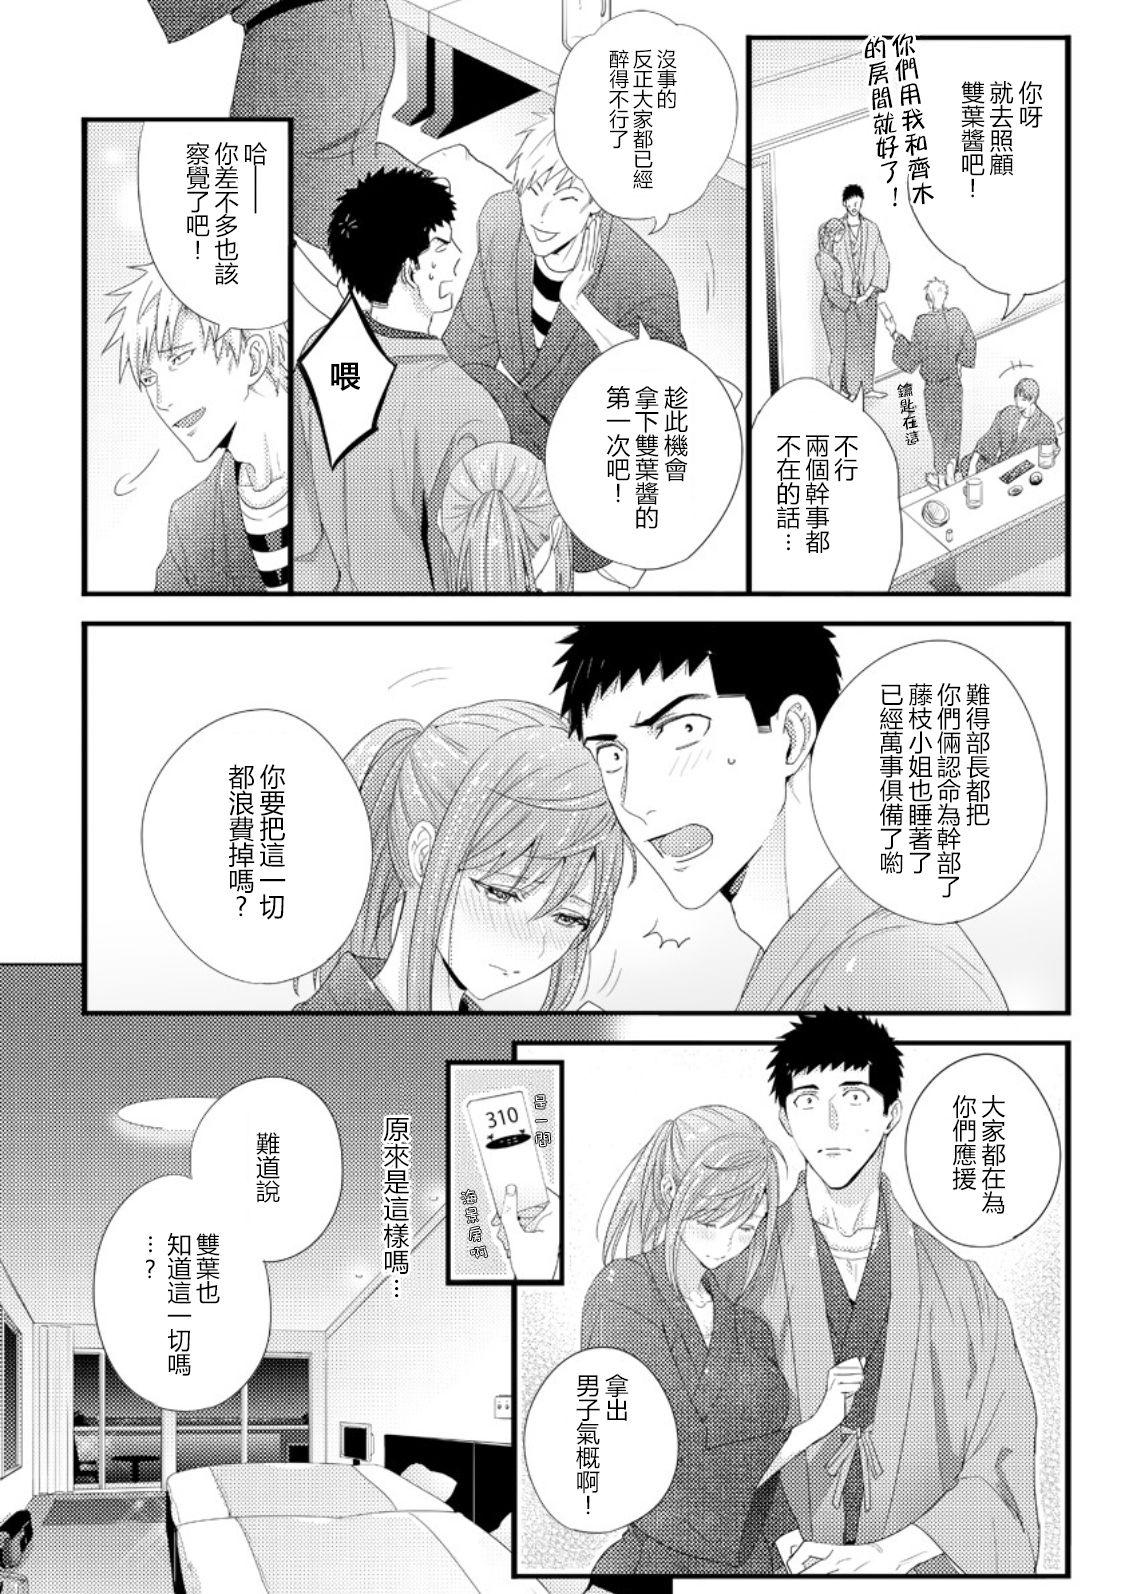 Please Let Me Hold You Futaba-San! Ch.1 11